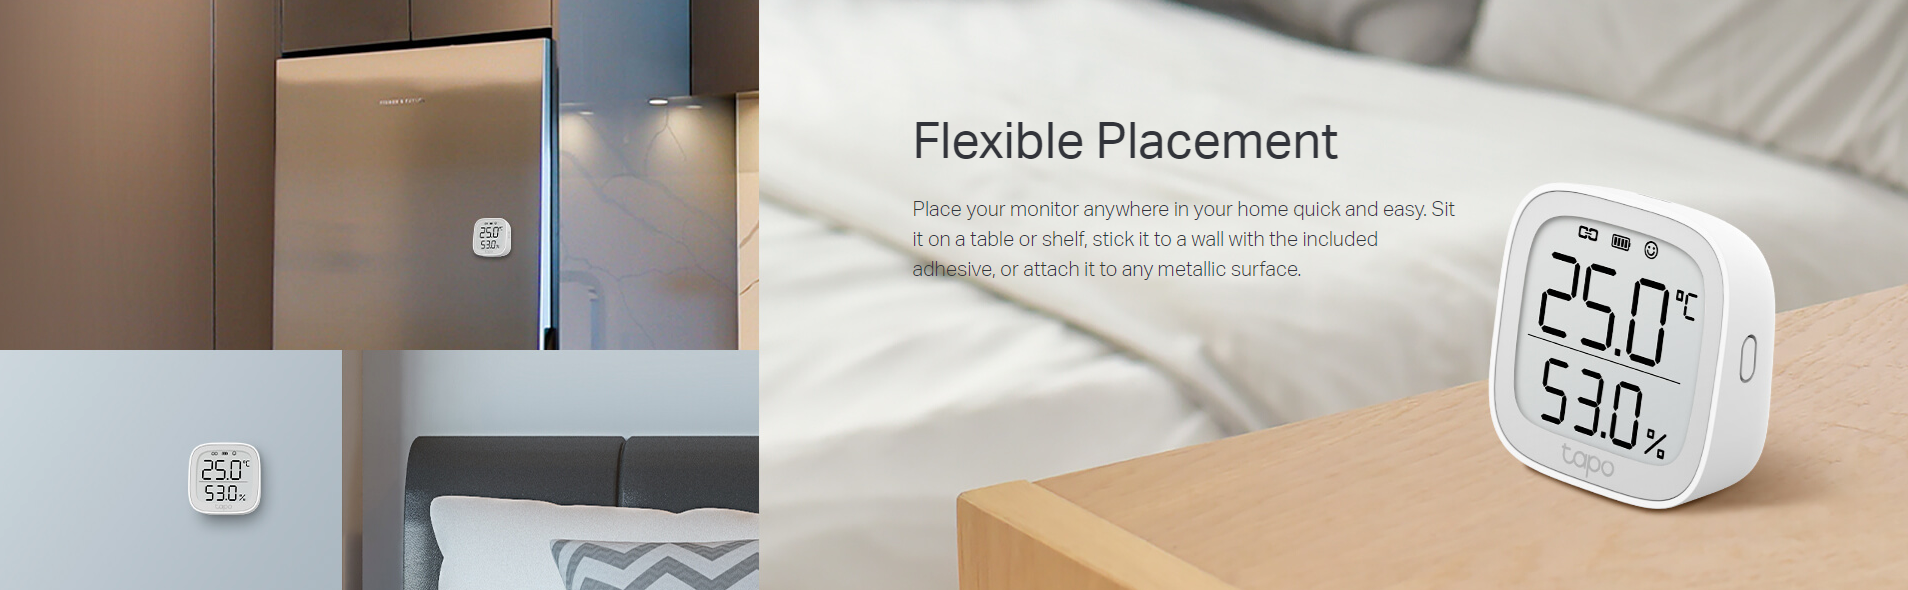 Flexible Placement
Place your monitor anywhere in your home quick and easy. Sit it on a table or shelf, stick it to a wall with the included adhesive, or attach it to any metallic surface.